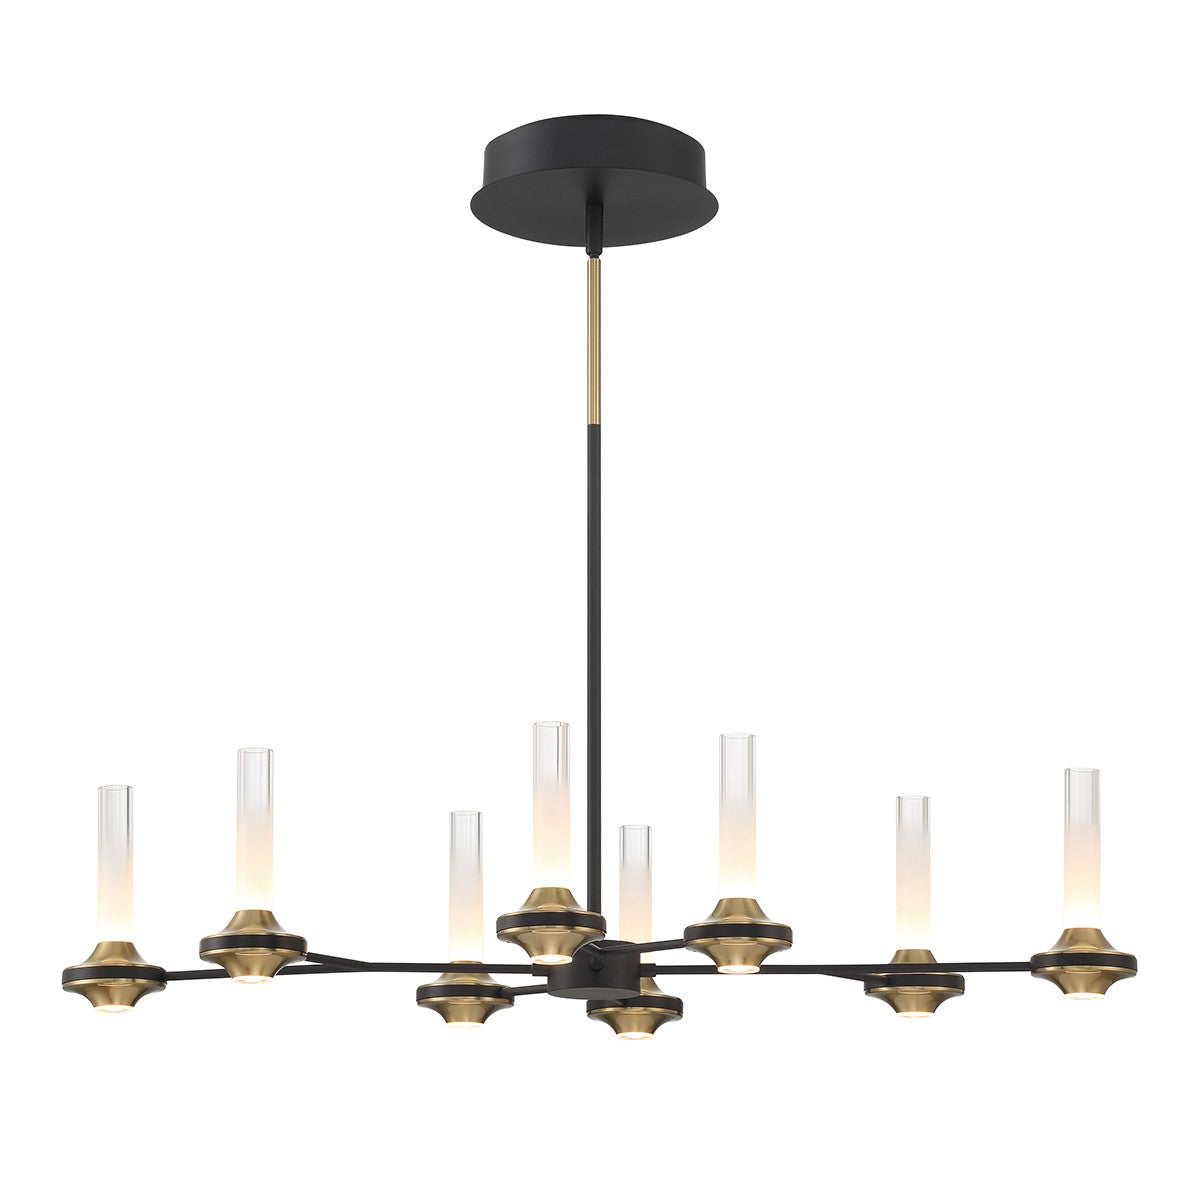 Eurofase Canada - 45714-016 - LED Chandelier - Torcia - Black and Brass